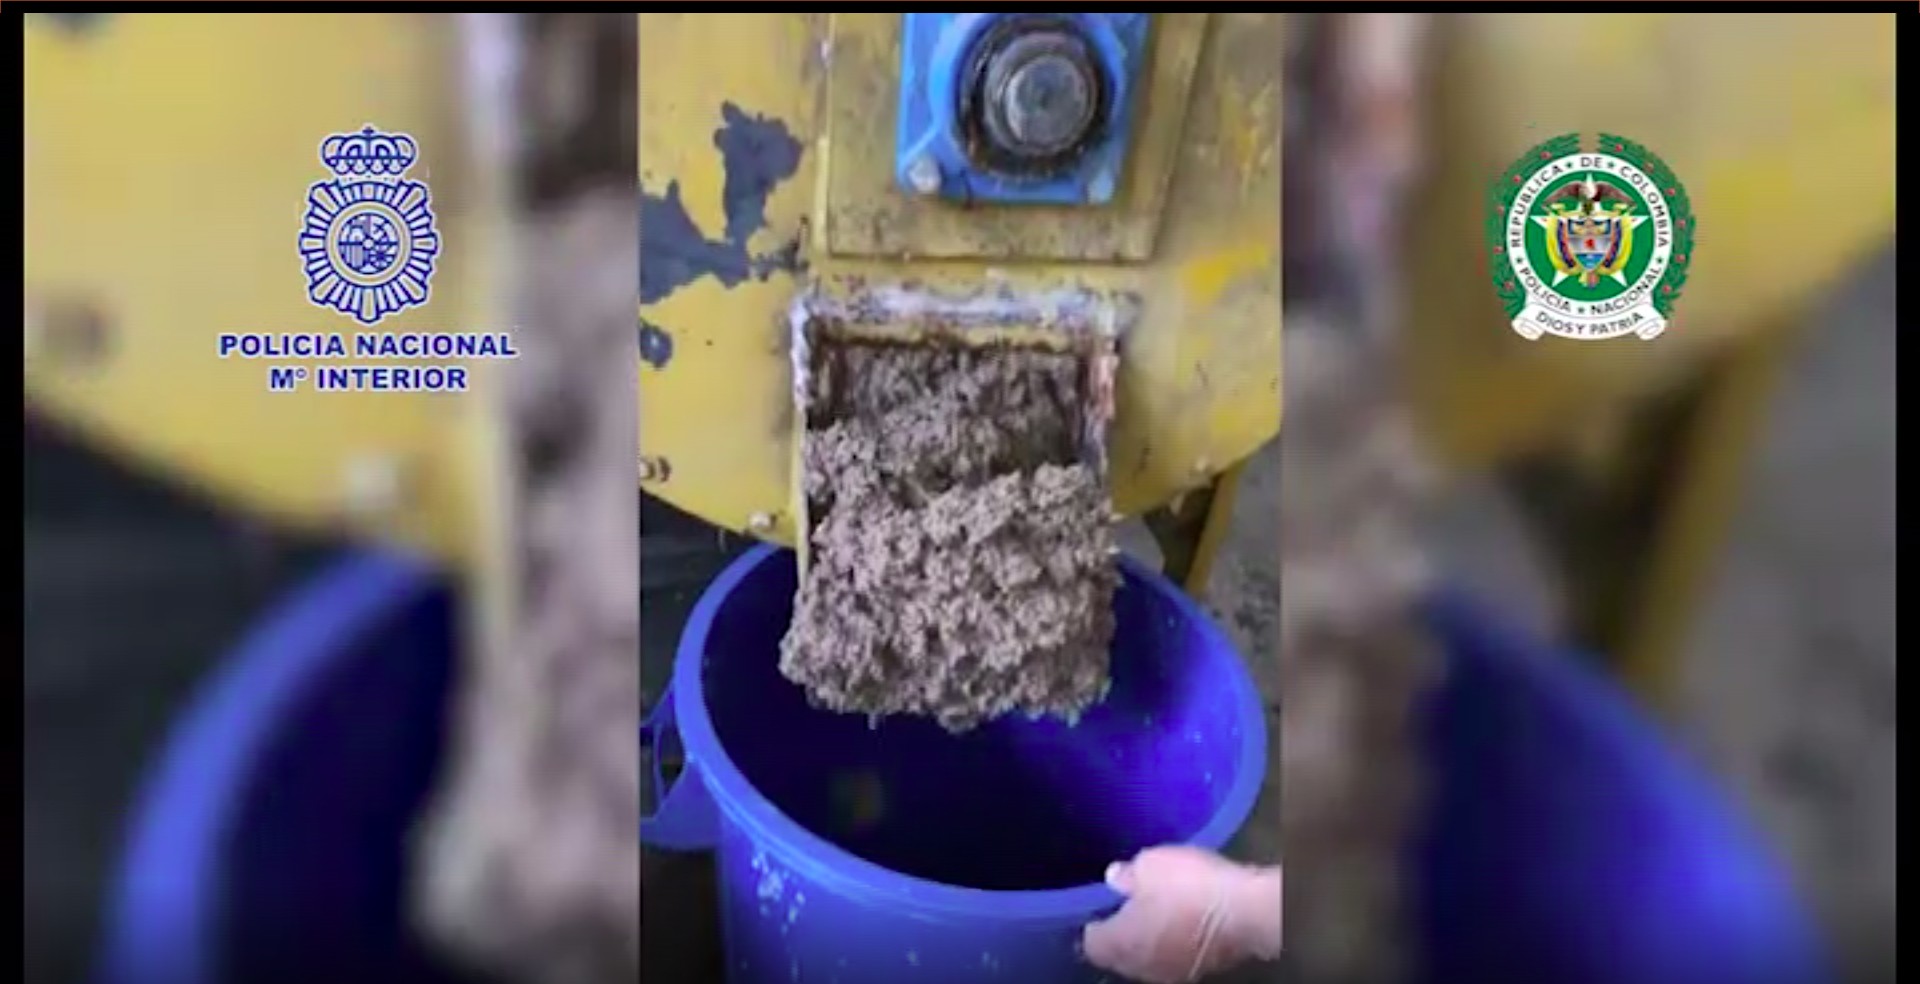 Police footage shows the pulping process used to infuse the cardboard boxes with cocaine (Photo: Policia Nacional)